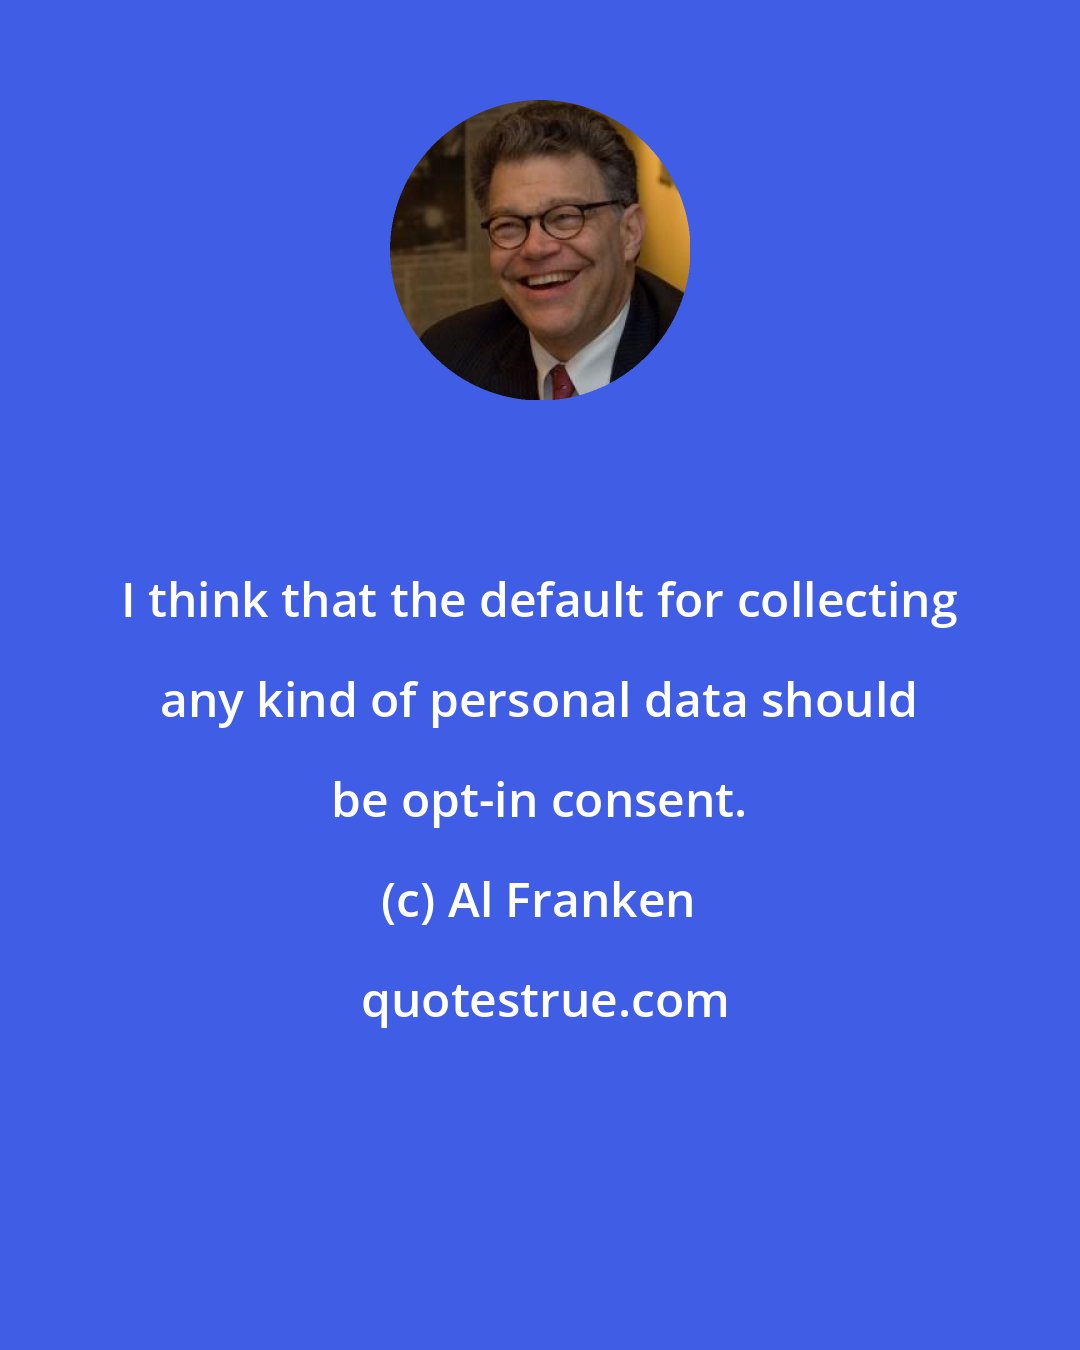 Al Franken: I think that the default for collecting any kind of personal data should be opt-in consent.